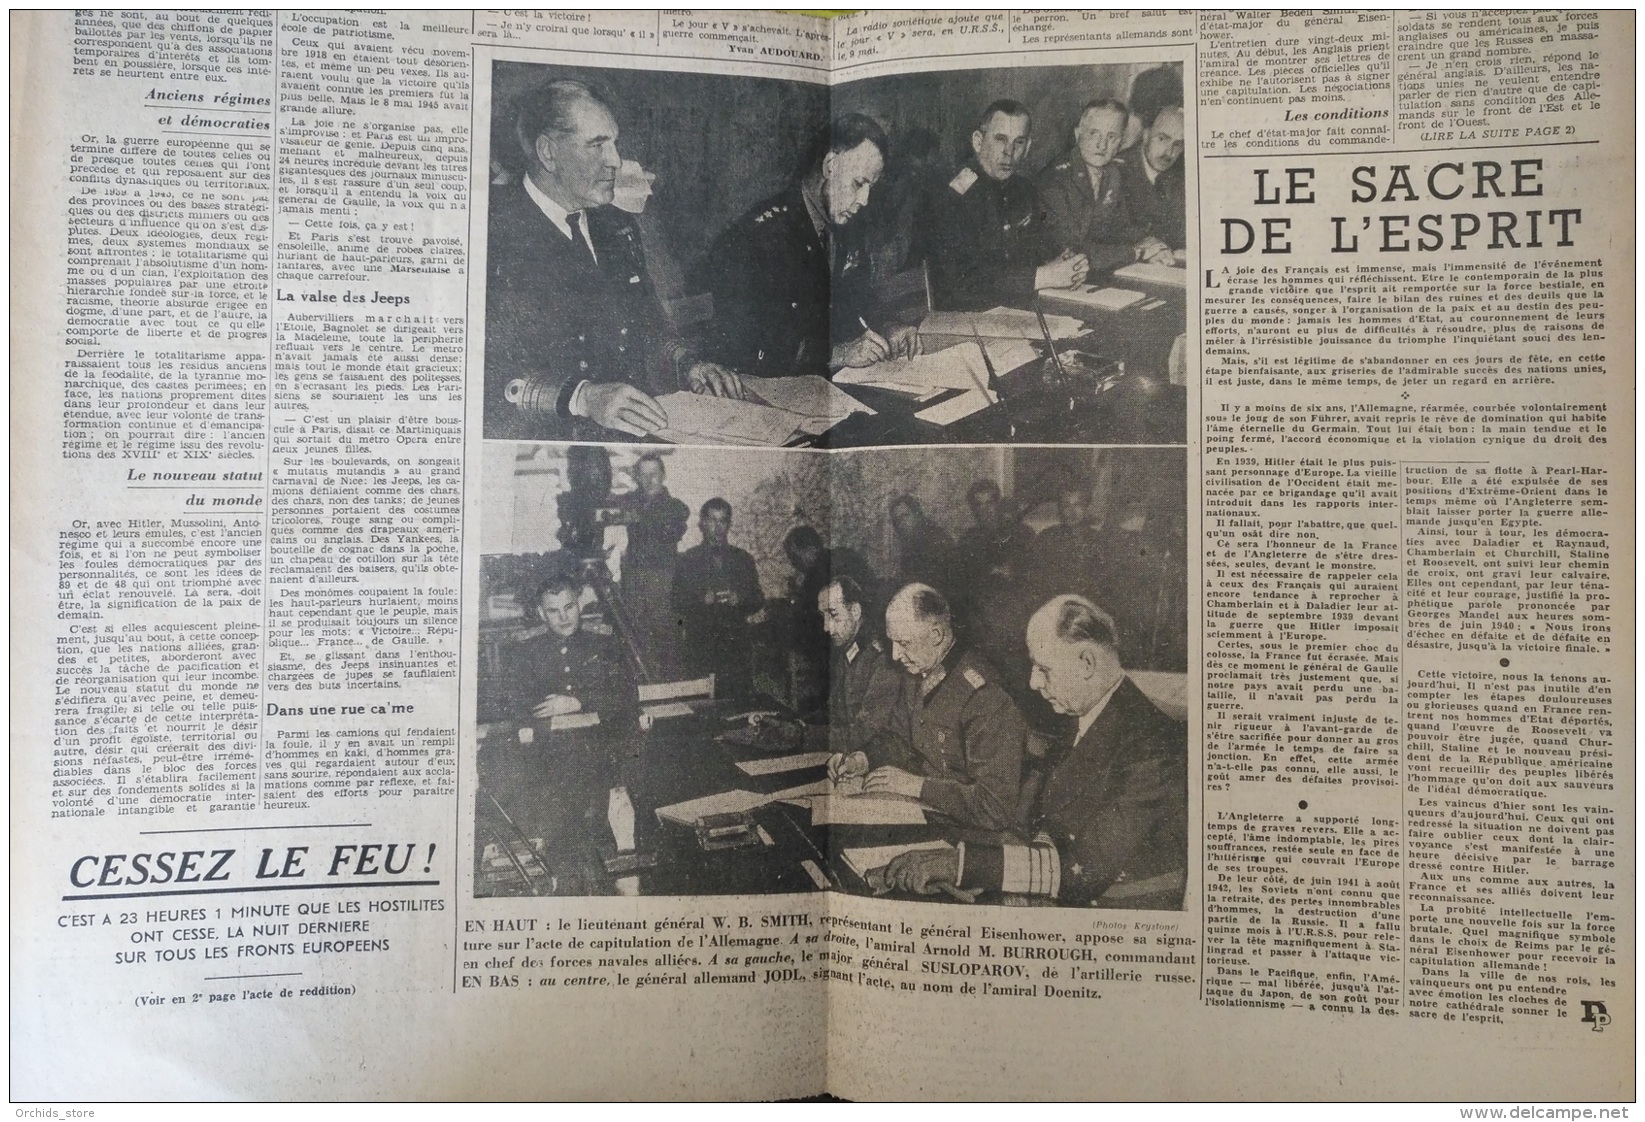 BOX - 9 MAY 1945 WWII VICTORY ISSUE N.62 Newspaper LA DEPECHE DE PARIS - Capitulation Of Germany - Historical Documents